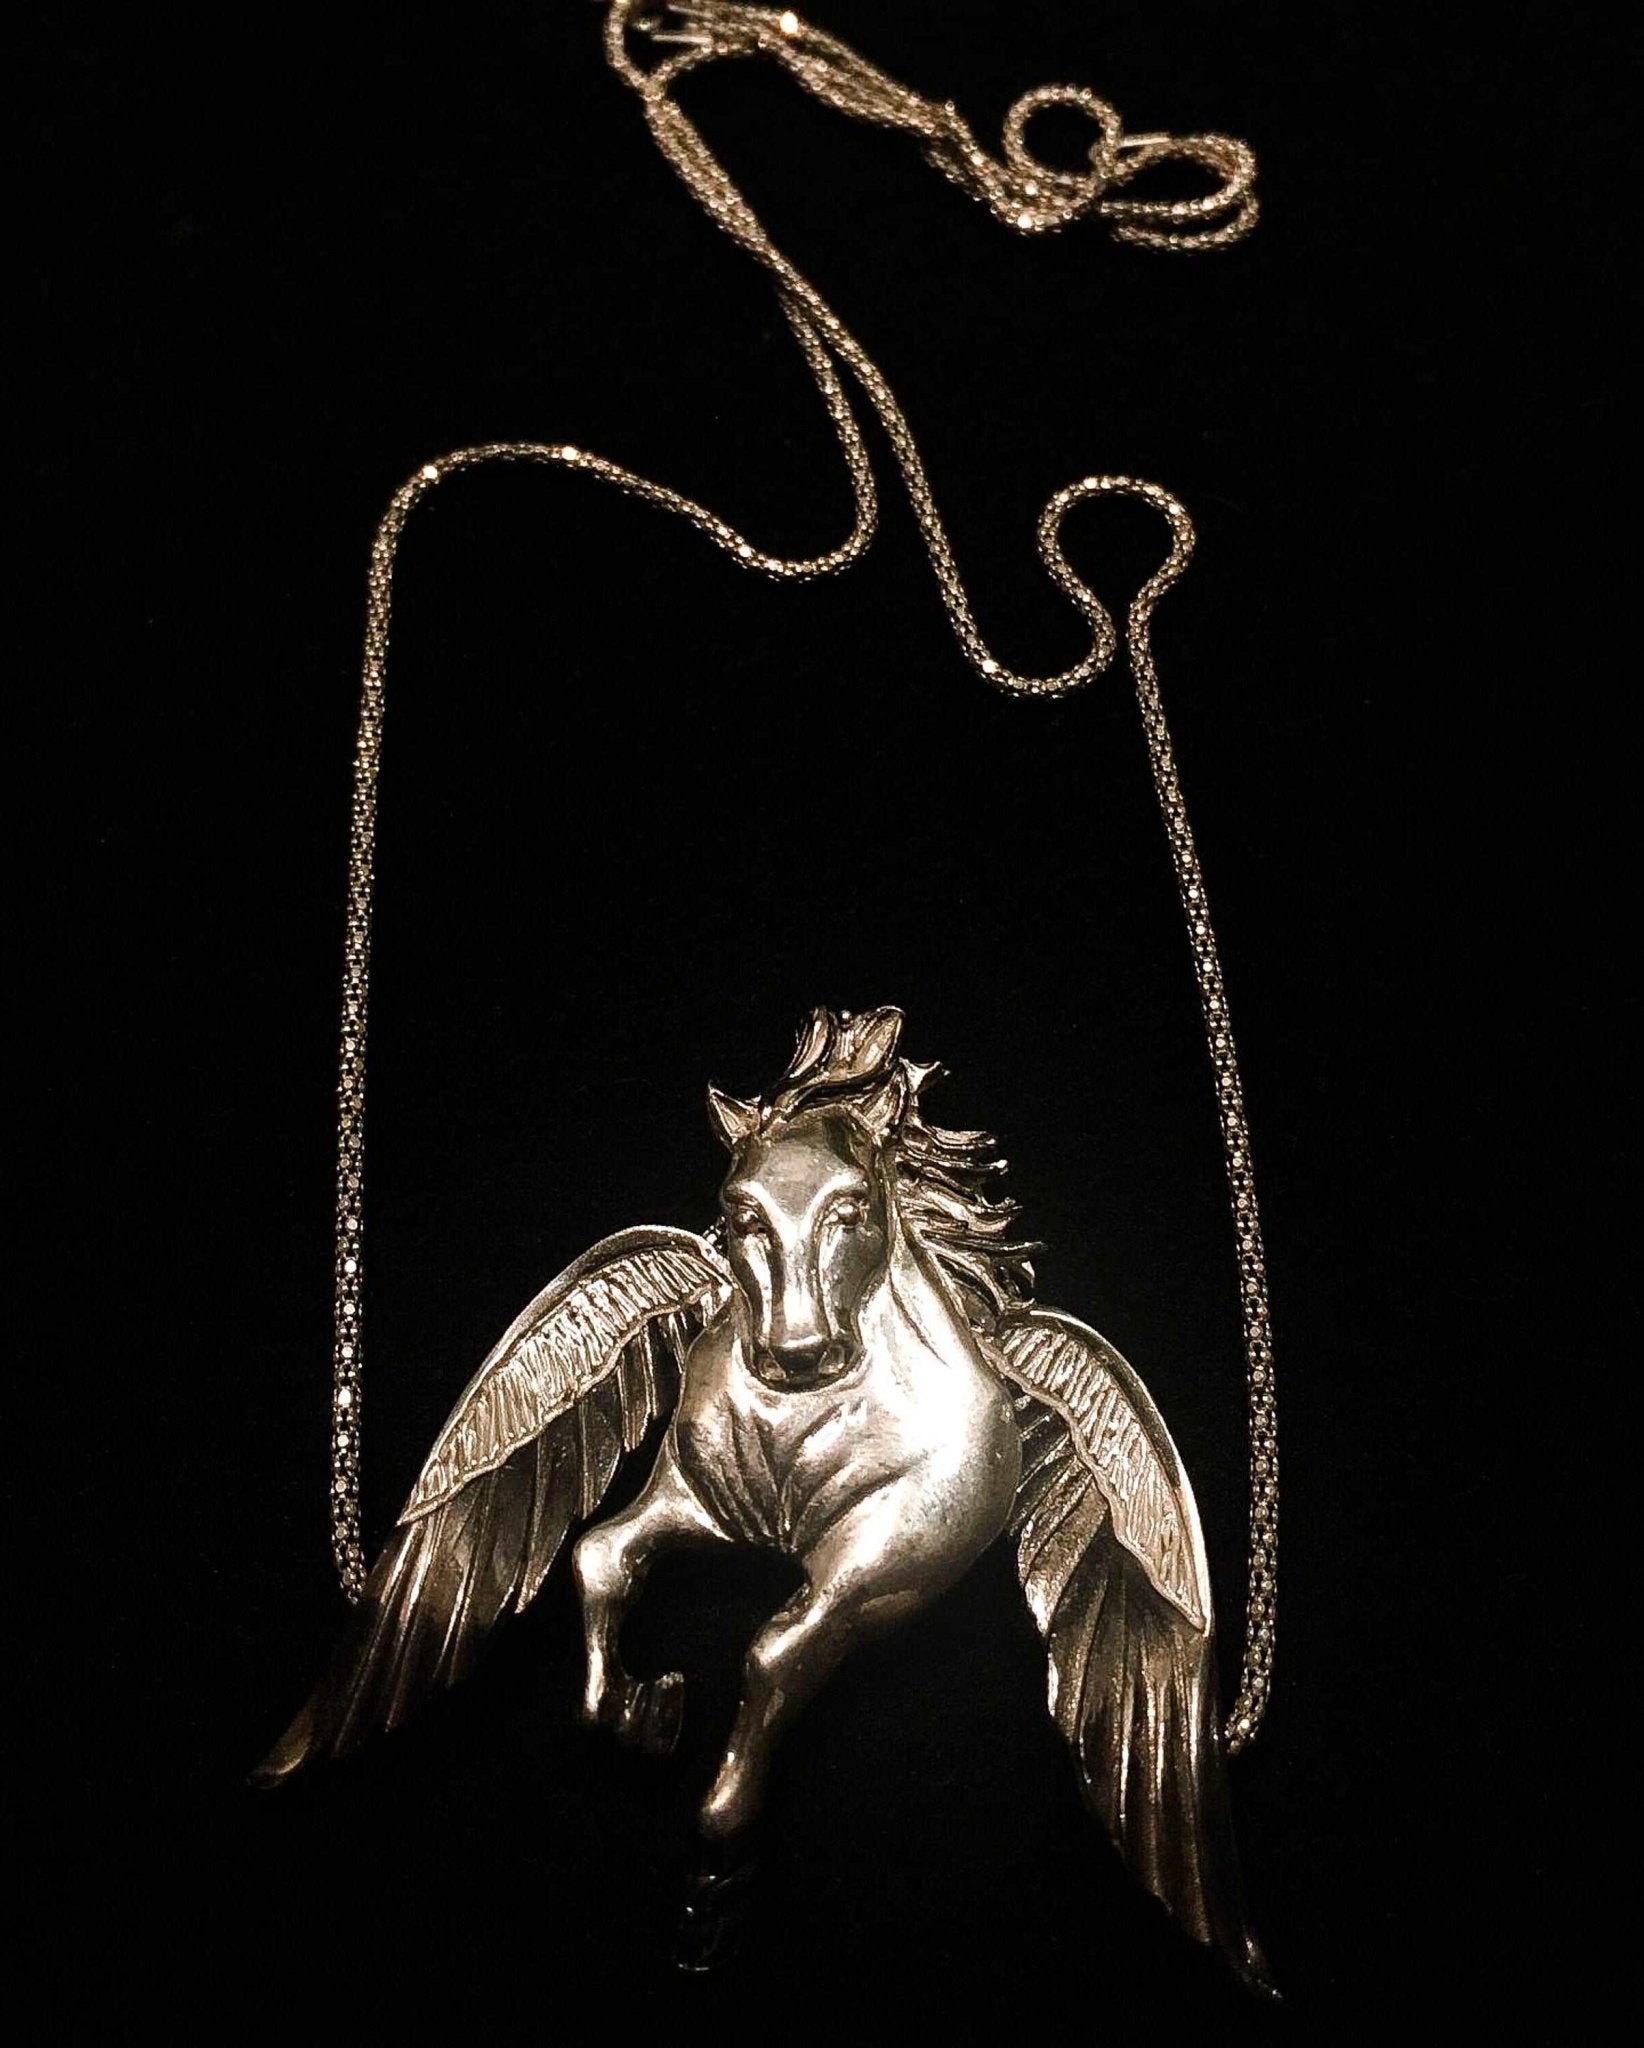 Custom Design Silver Pegasus Necklace, Jewelry Pegasus Pendant, Silver Animal Desing Necklace, Winged Horse, 925 Gift For Her - Tracesilver